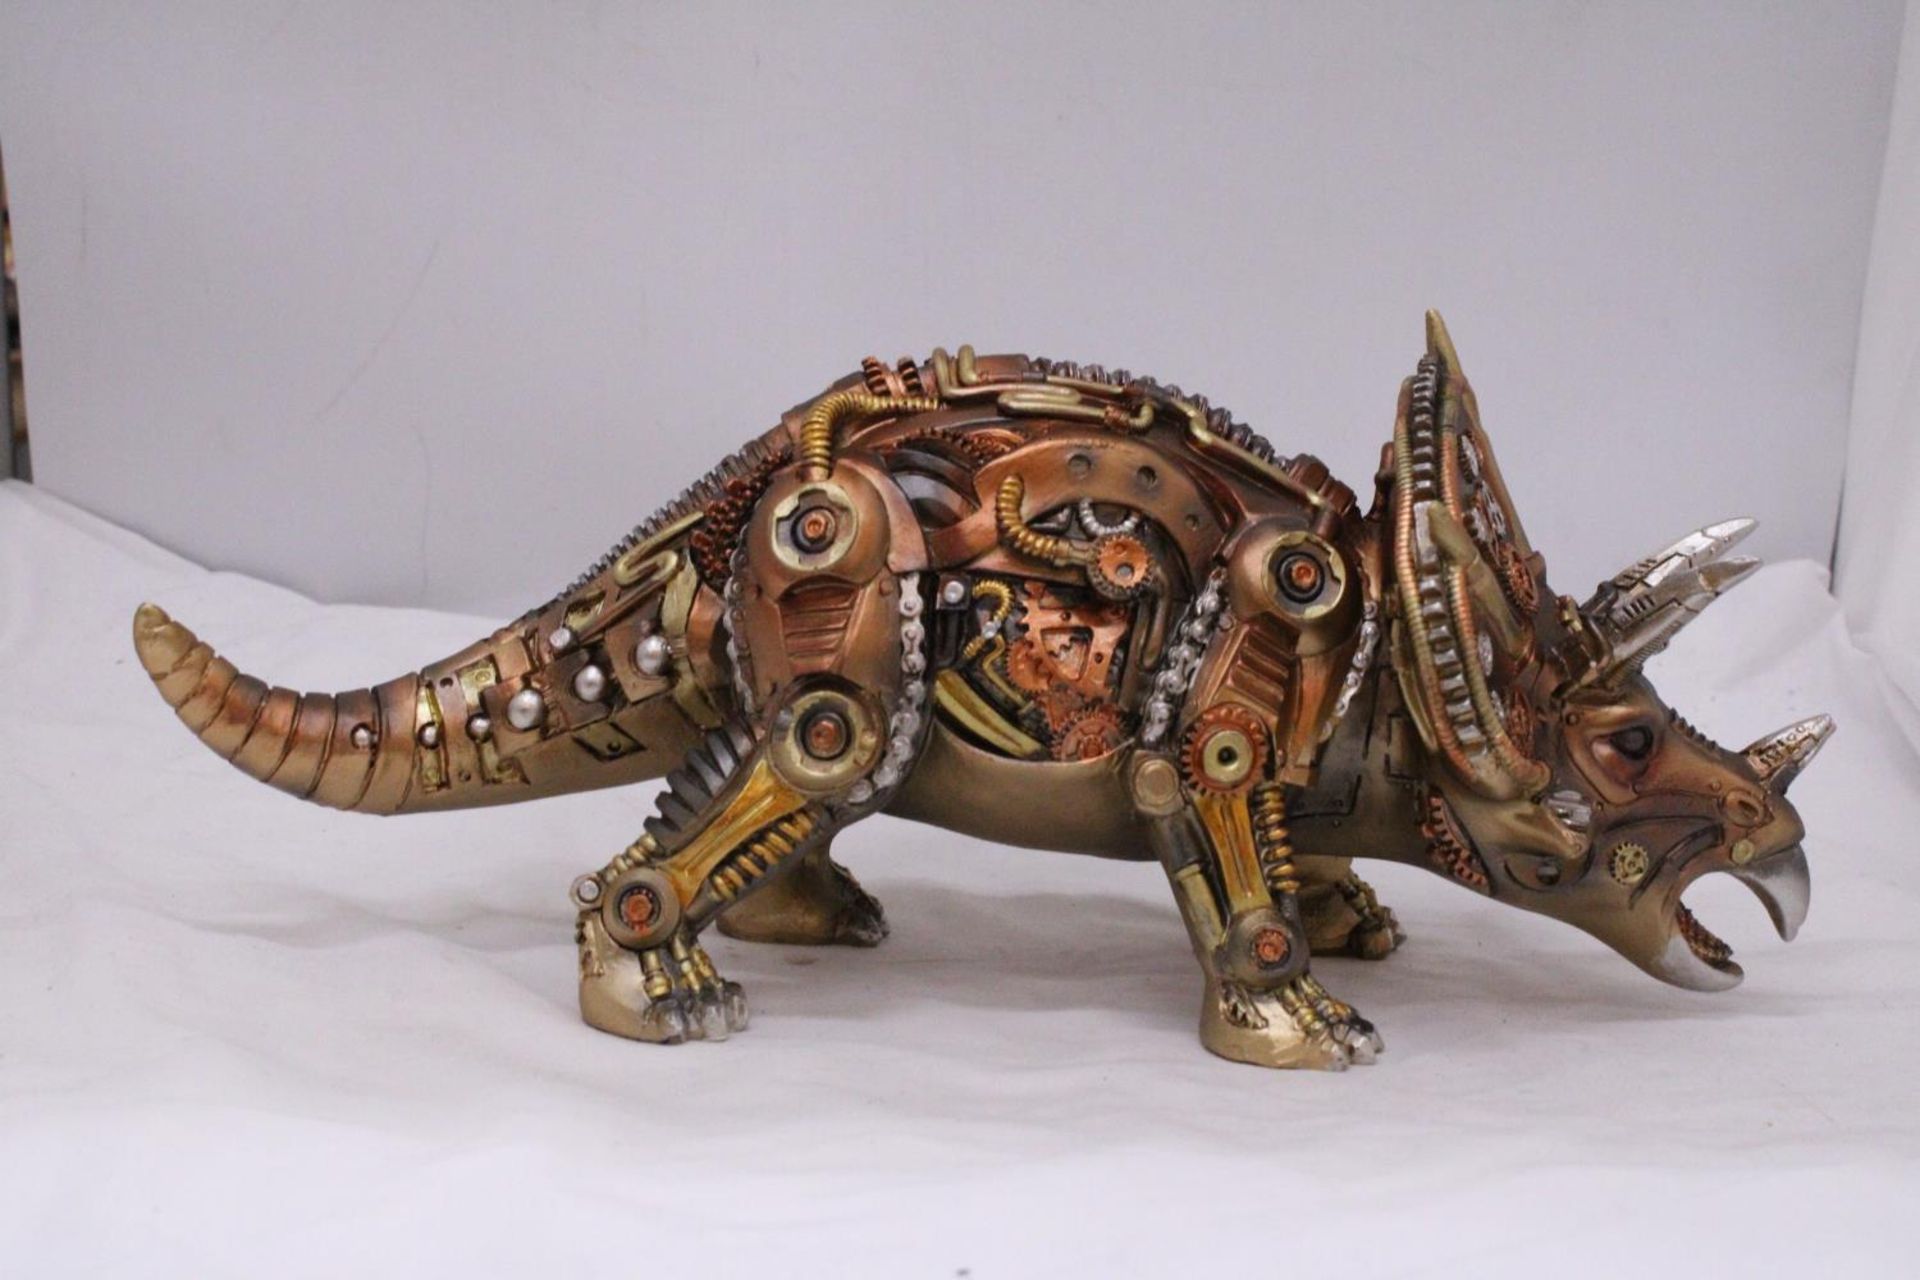 A MECHANICAL STYLE TRICERATOPS - Image 2 of 5